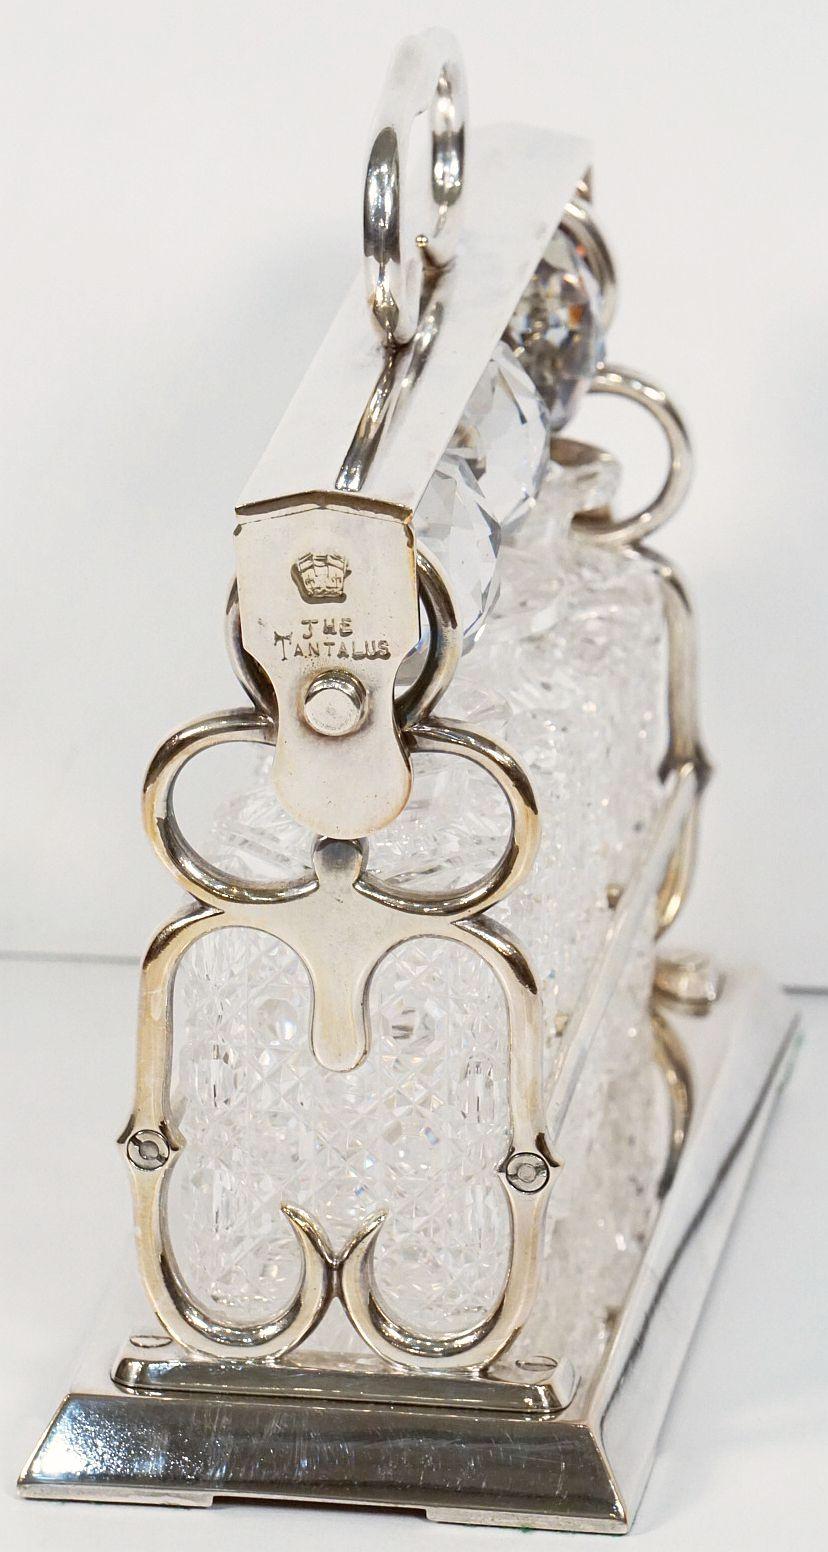 Early 20th Century Betjemann's Three-Bottle Tantalus with Original Hobnail Crystal Decanters